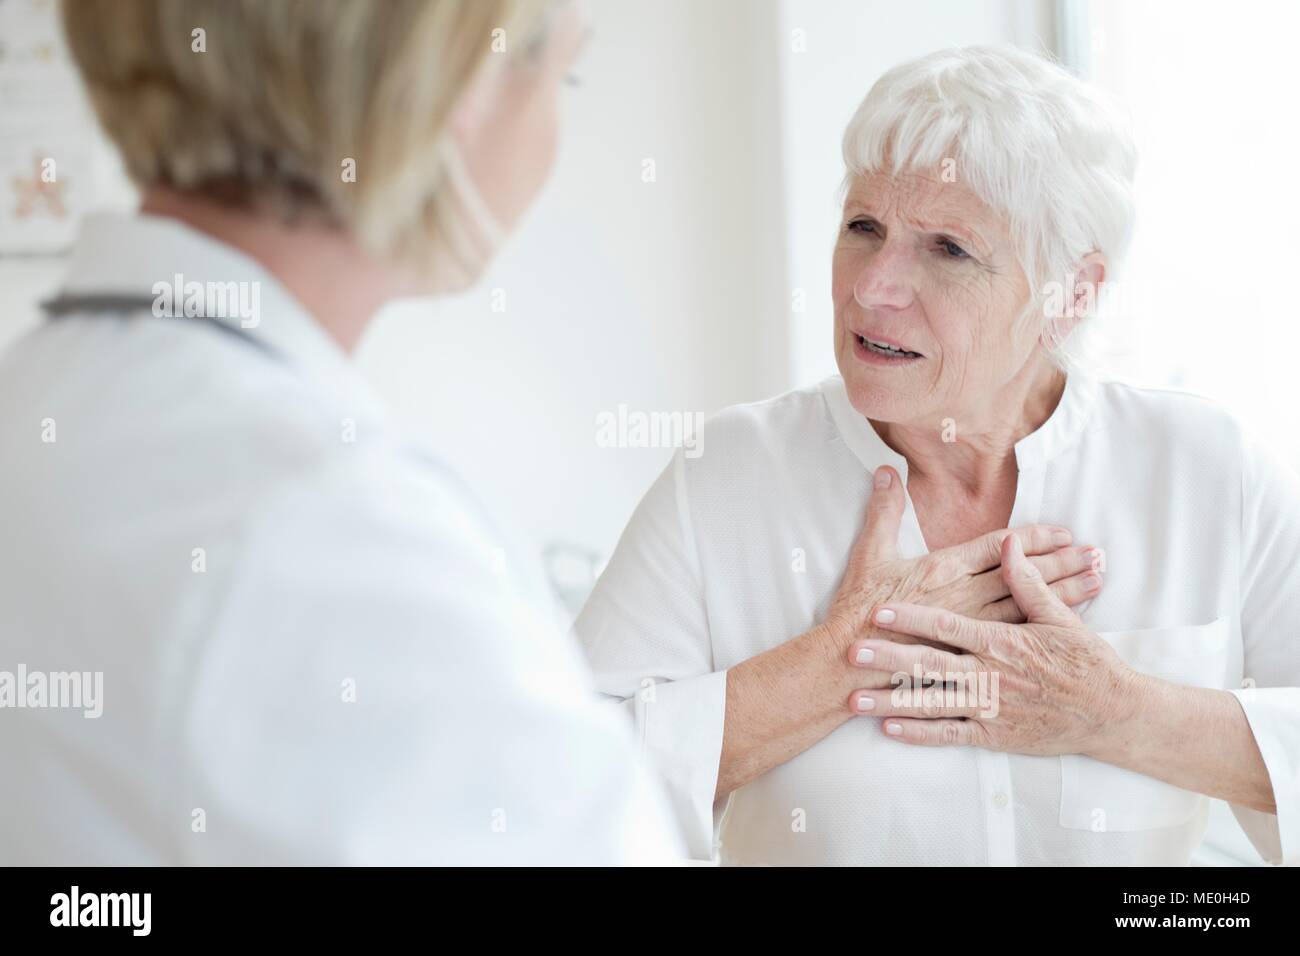 Senior woman touching chest and talking to female doctor. Stock Photo